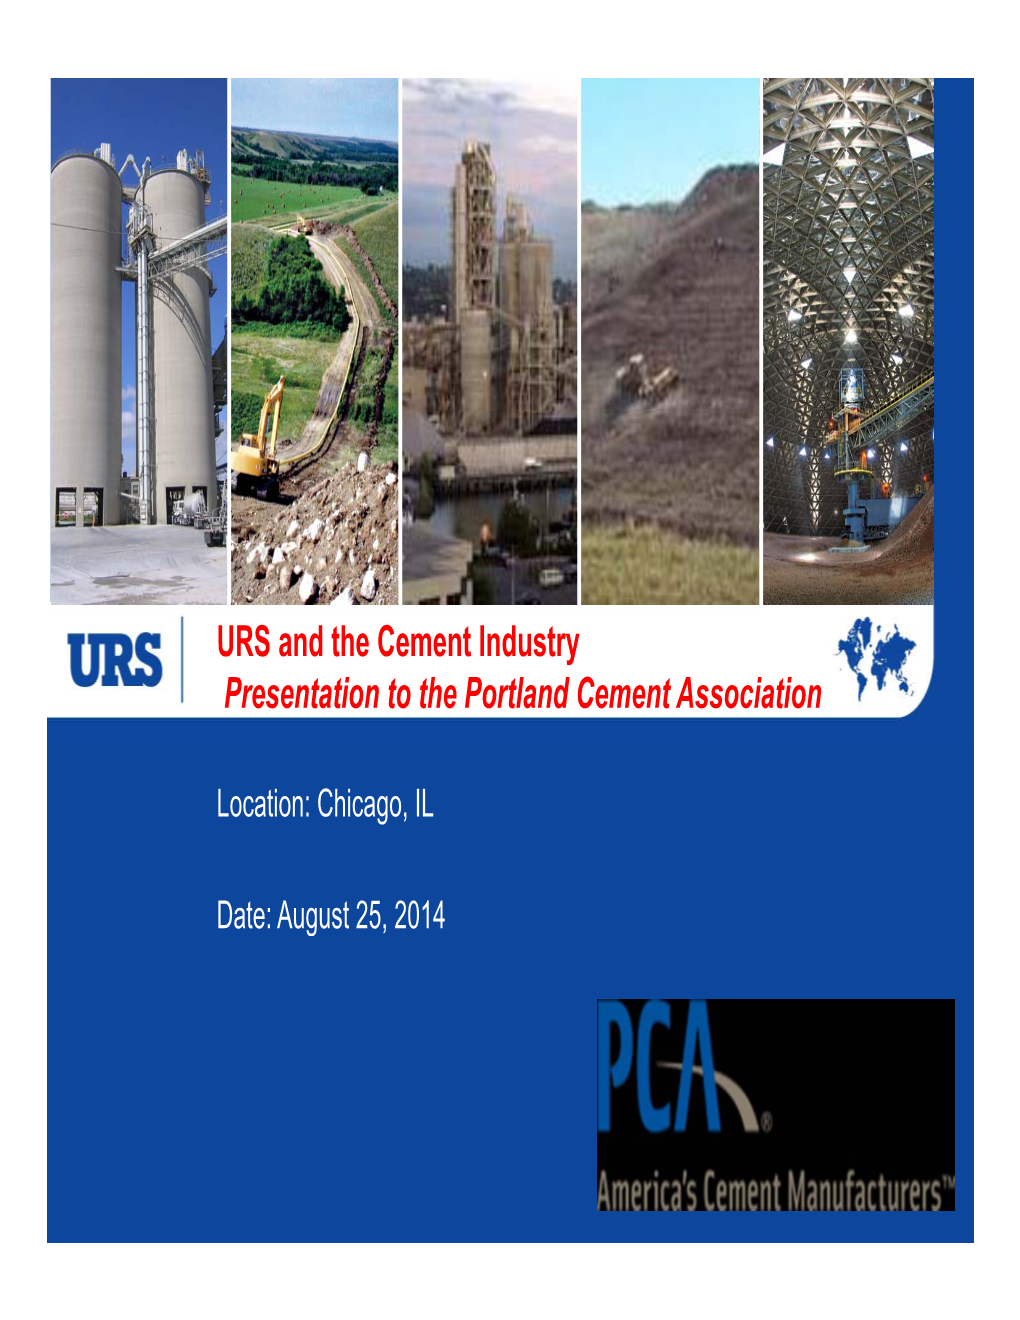 URS and the Cement Industry Presentation to the Portland Cement Association